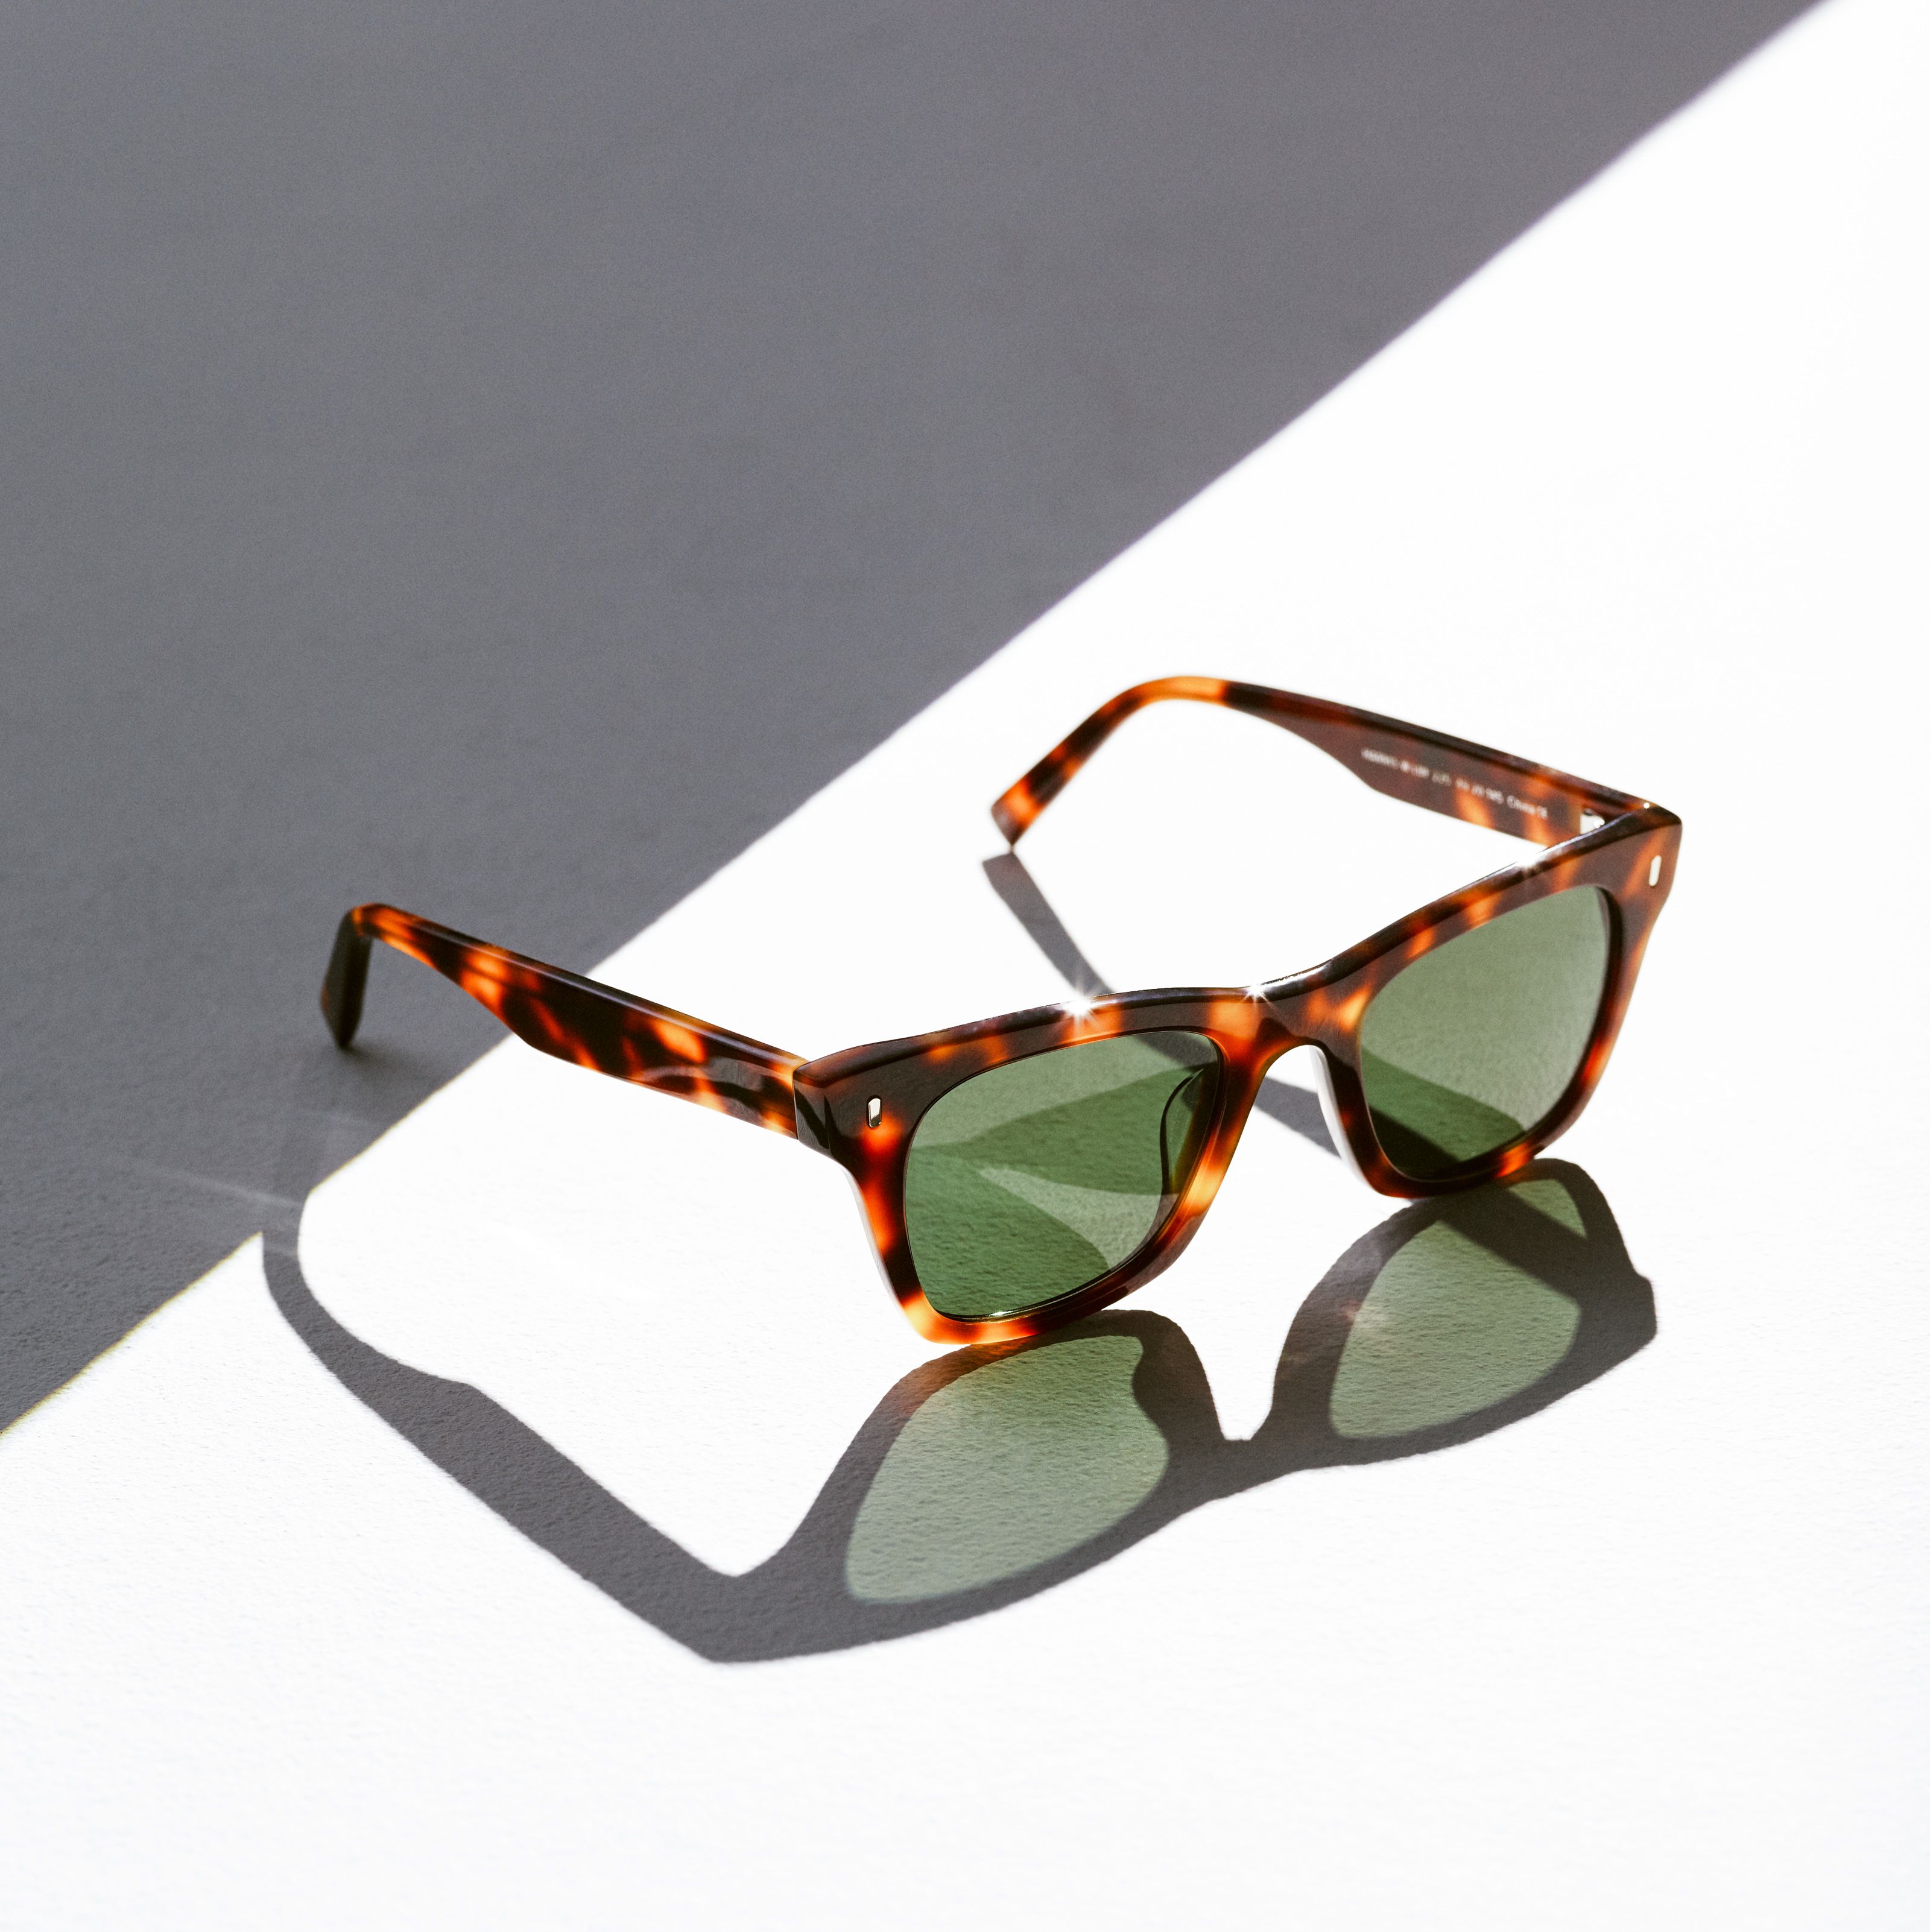 The Affordable Sunglasses That Look Great on Everyone. (Seriously. Everyone.)